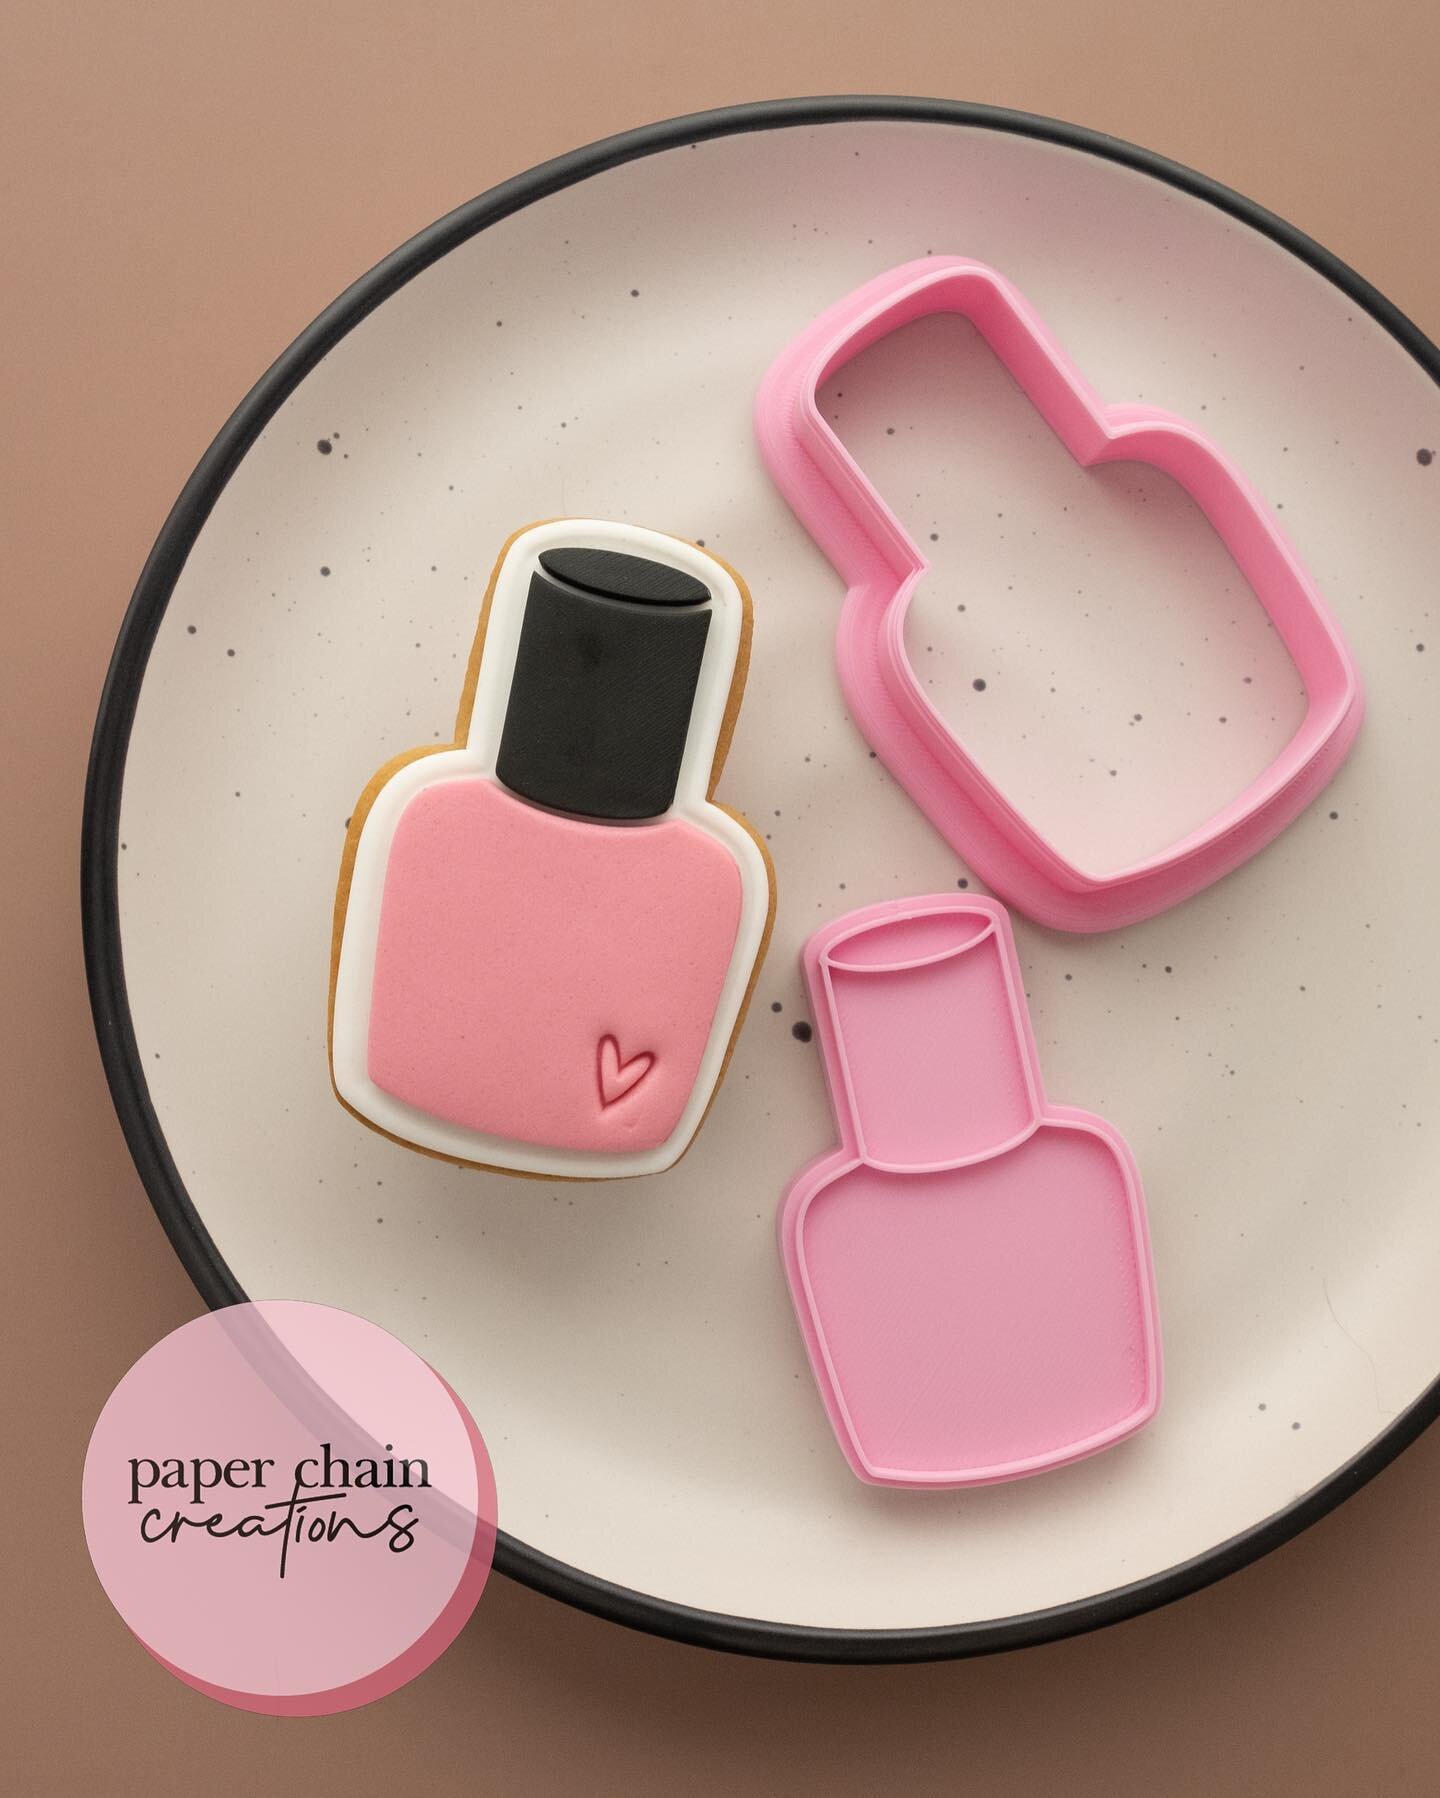 💕nail polish 💕
.
Another lovely new design! Simple but effective.
.
#fondantcookies #cookiecutters #cookies #paperchaincreations #customcookies #baking #fondant #cookiedecorating #makeupcookies #fondantmakeupcookies